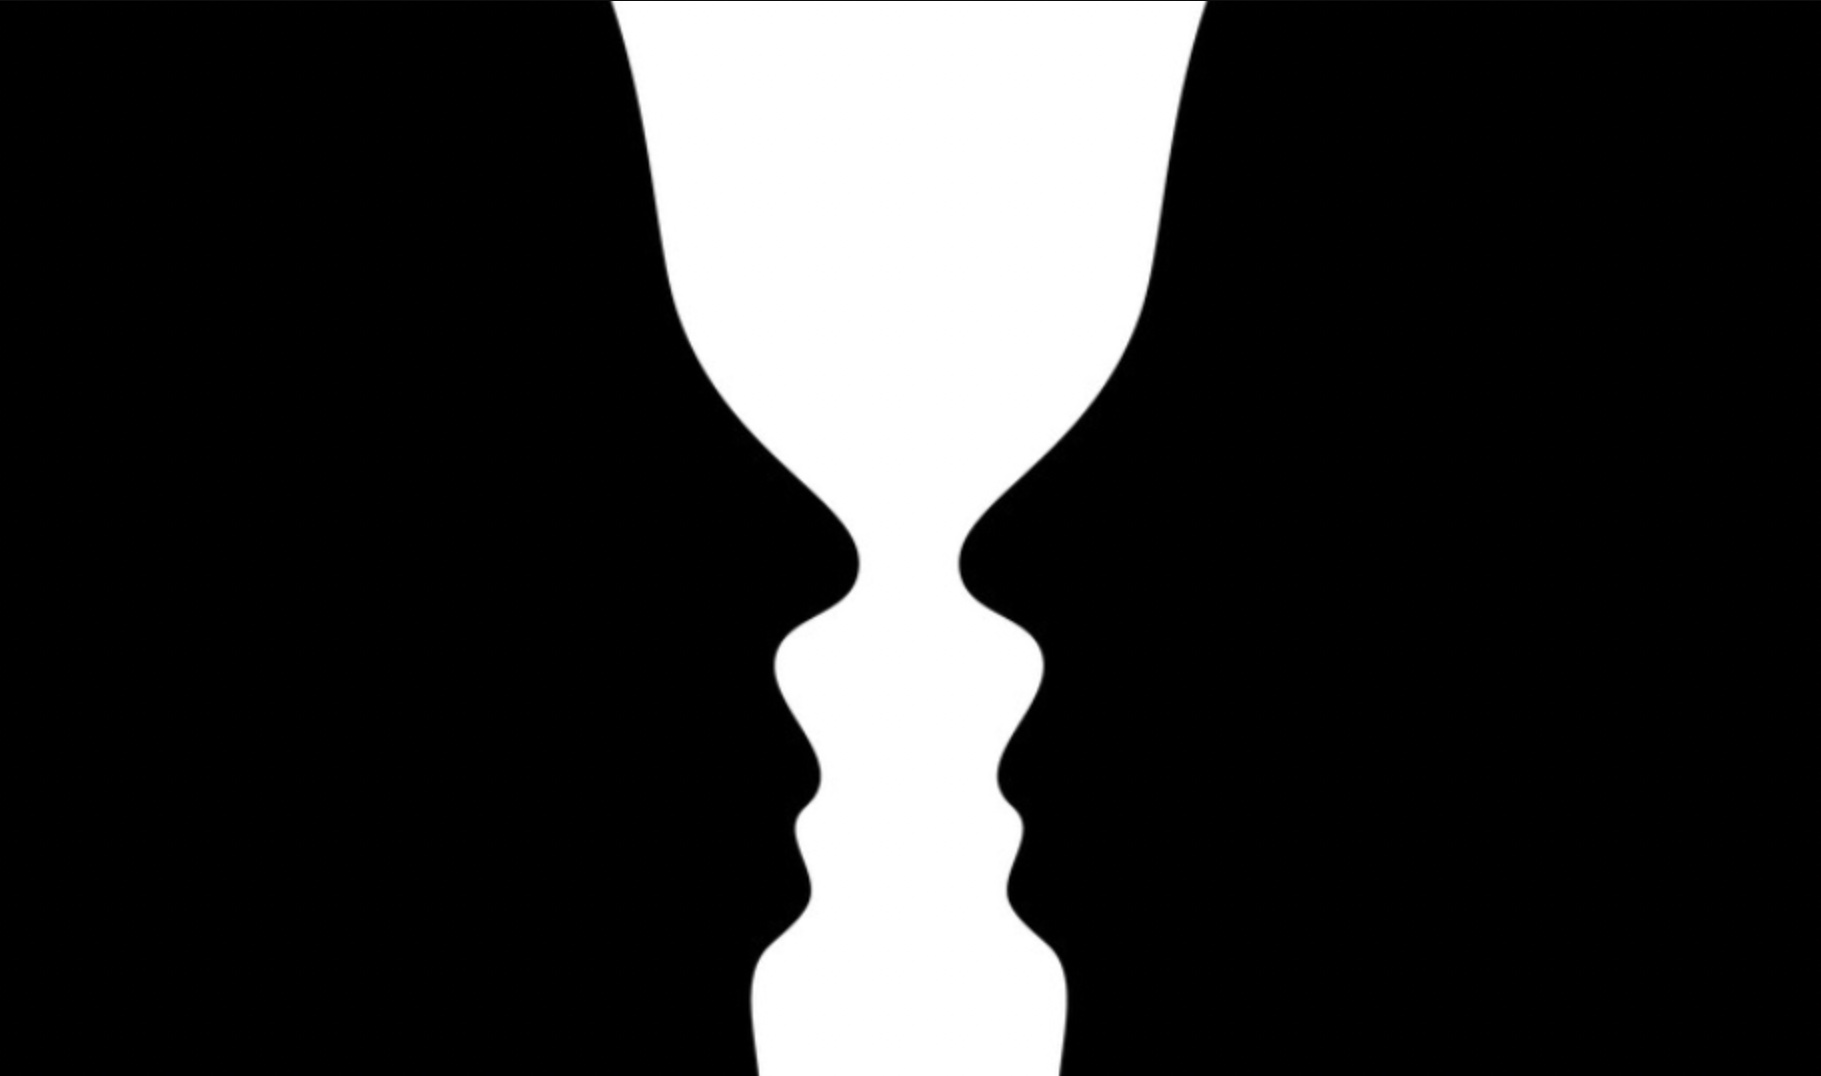 Outline of two people's side profiles linked to perception